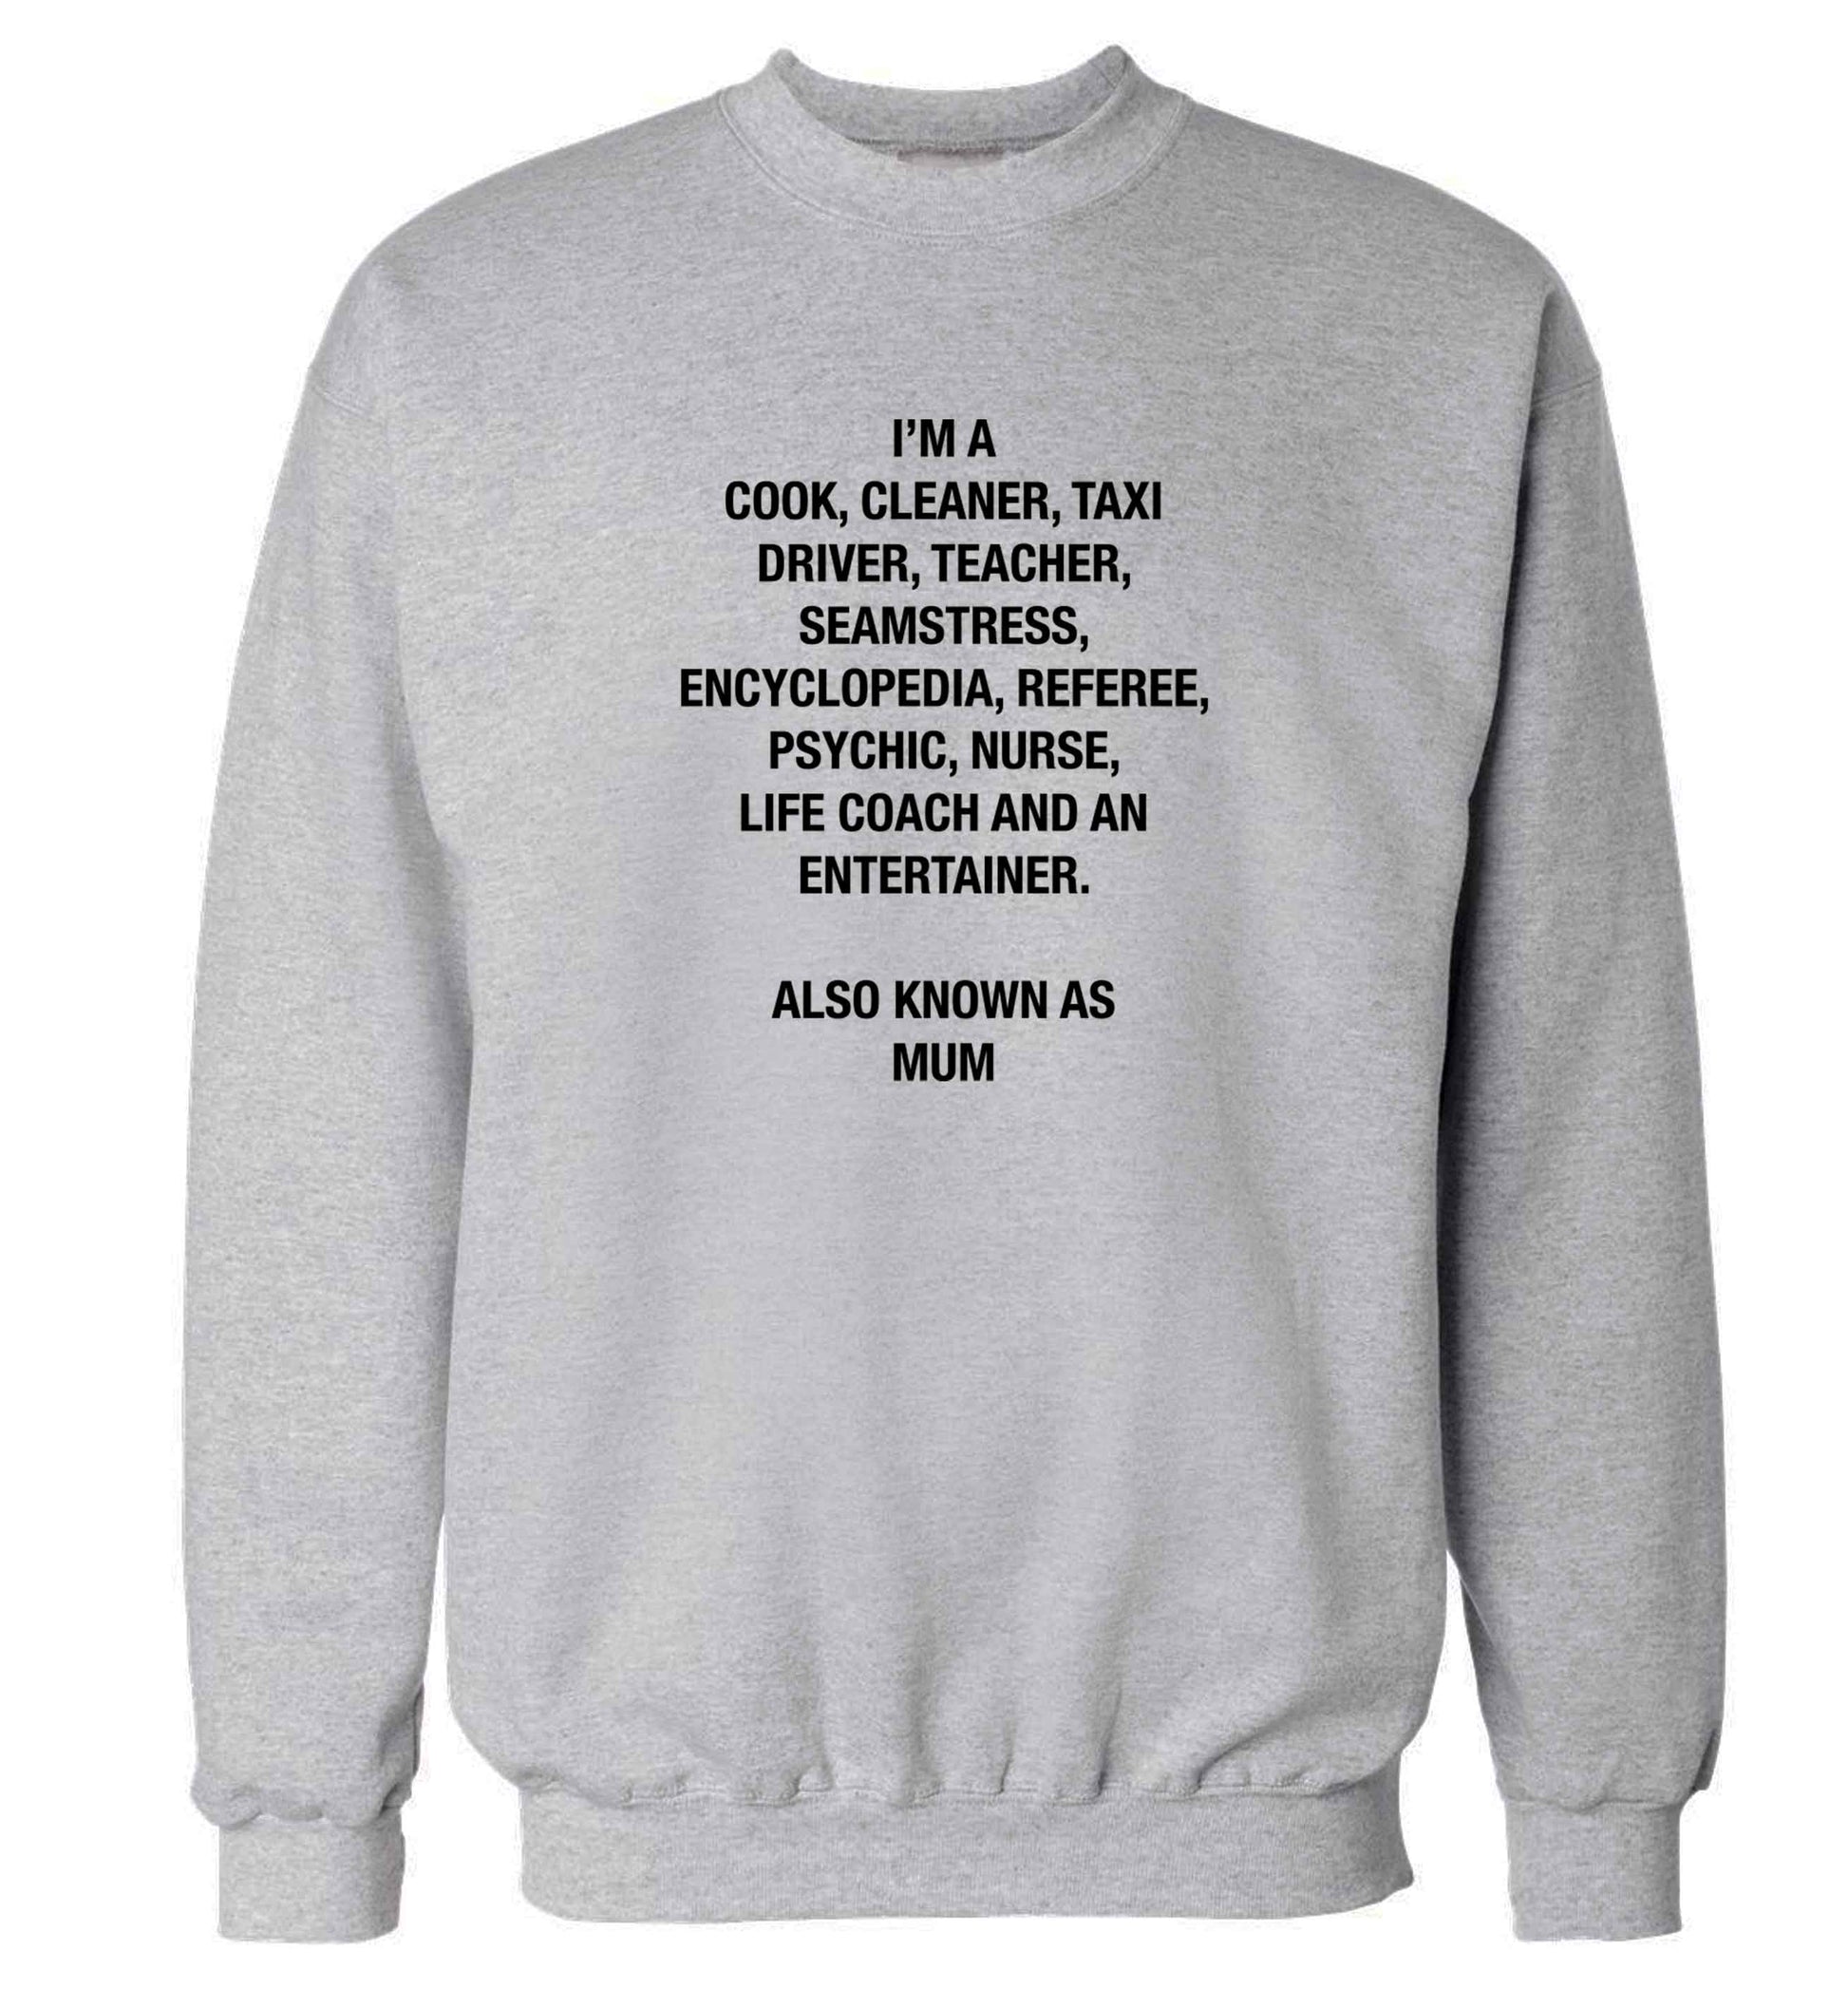 Funny gifts for your mum on mother's dayor her birthday! Mum, cook, cleaner, taxi driver, teacher, seamstress, encyclopedia, referee, psychic, nurse, life coach and entertainer adult's unisex grey sweater 2XL